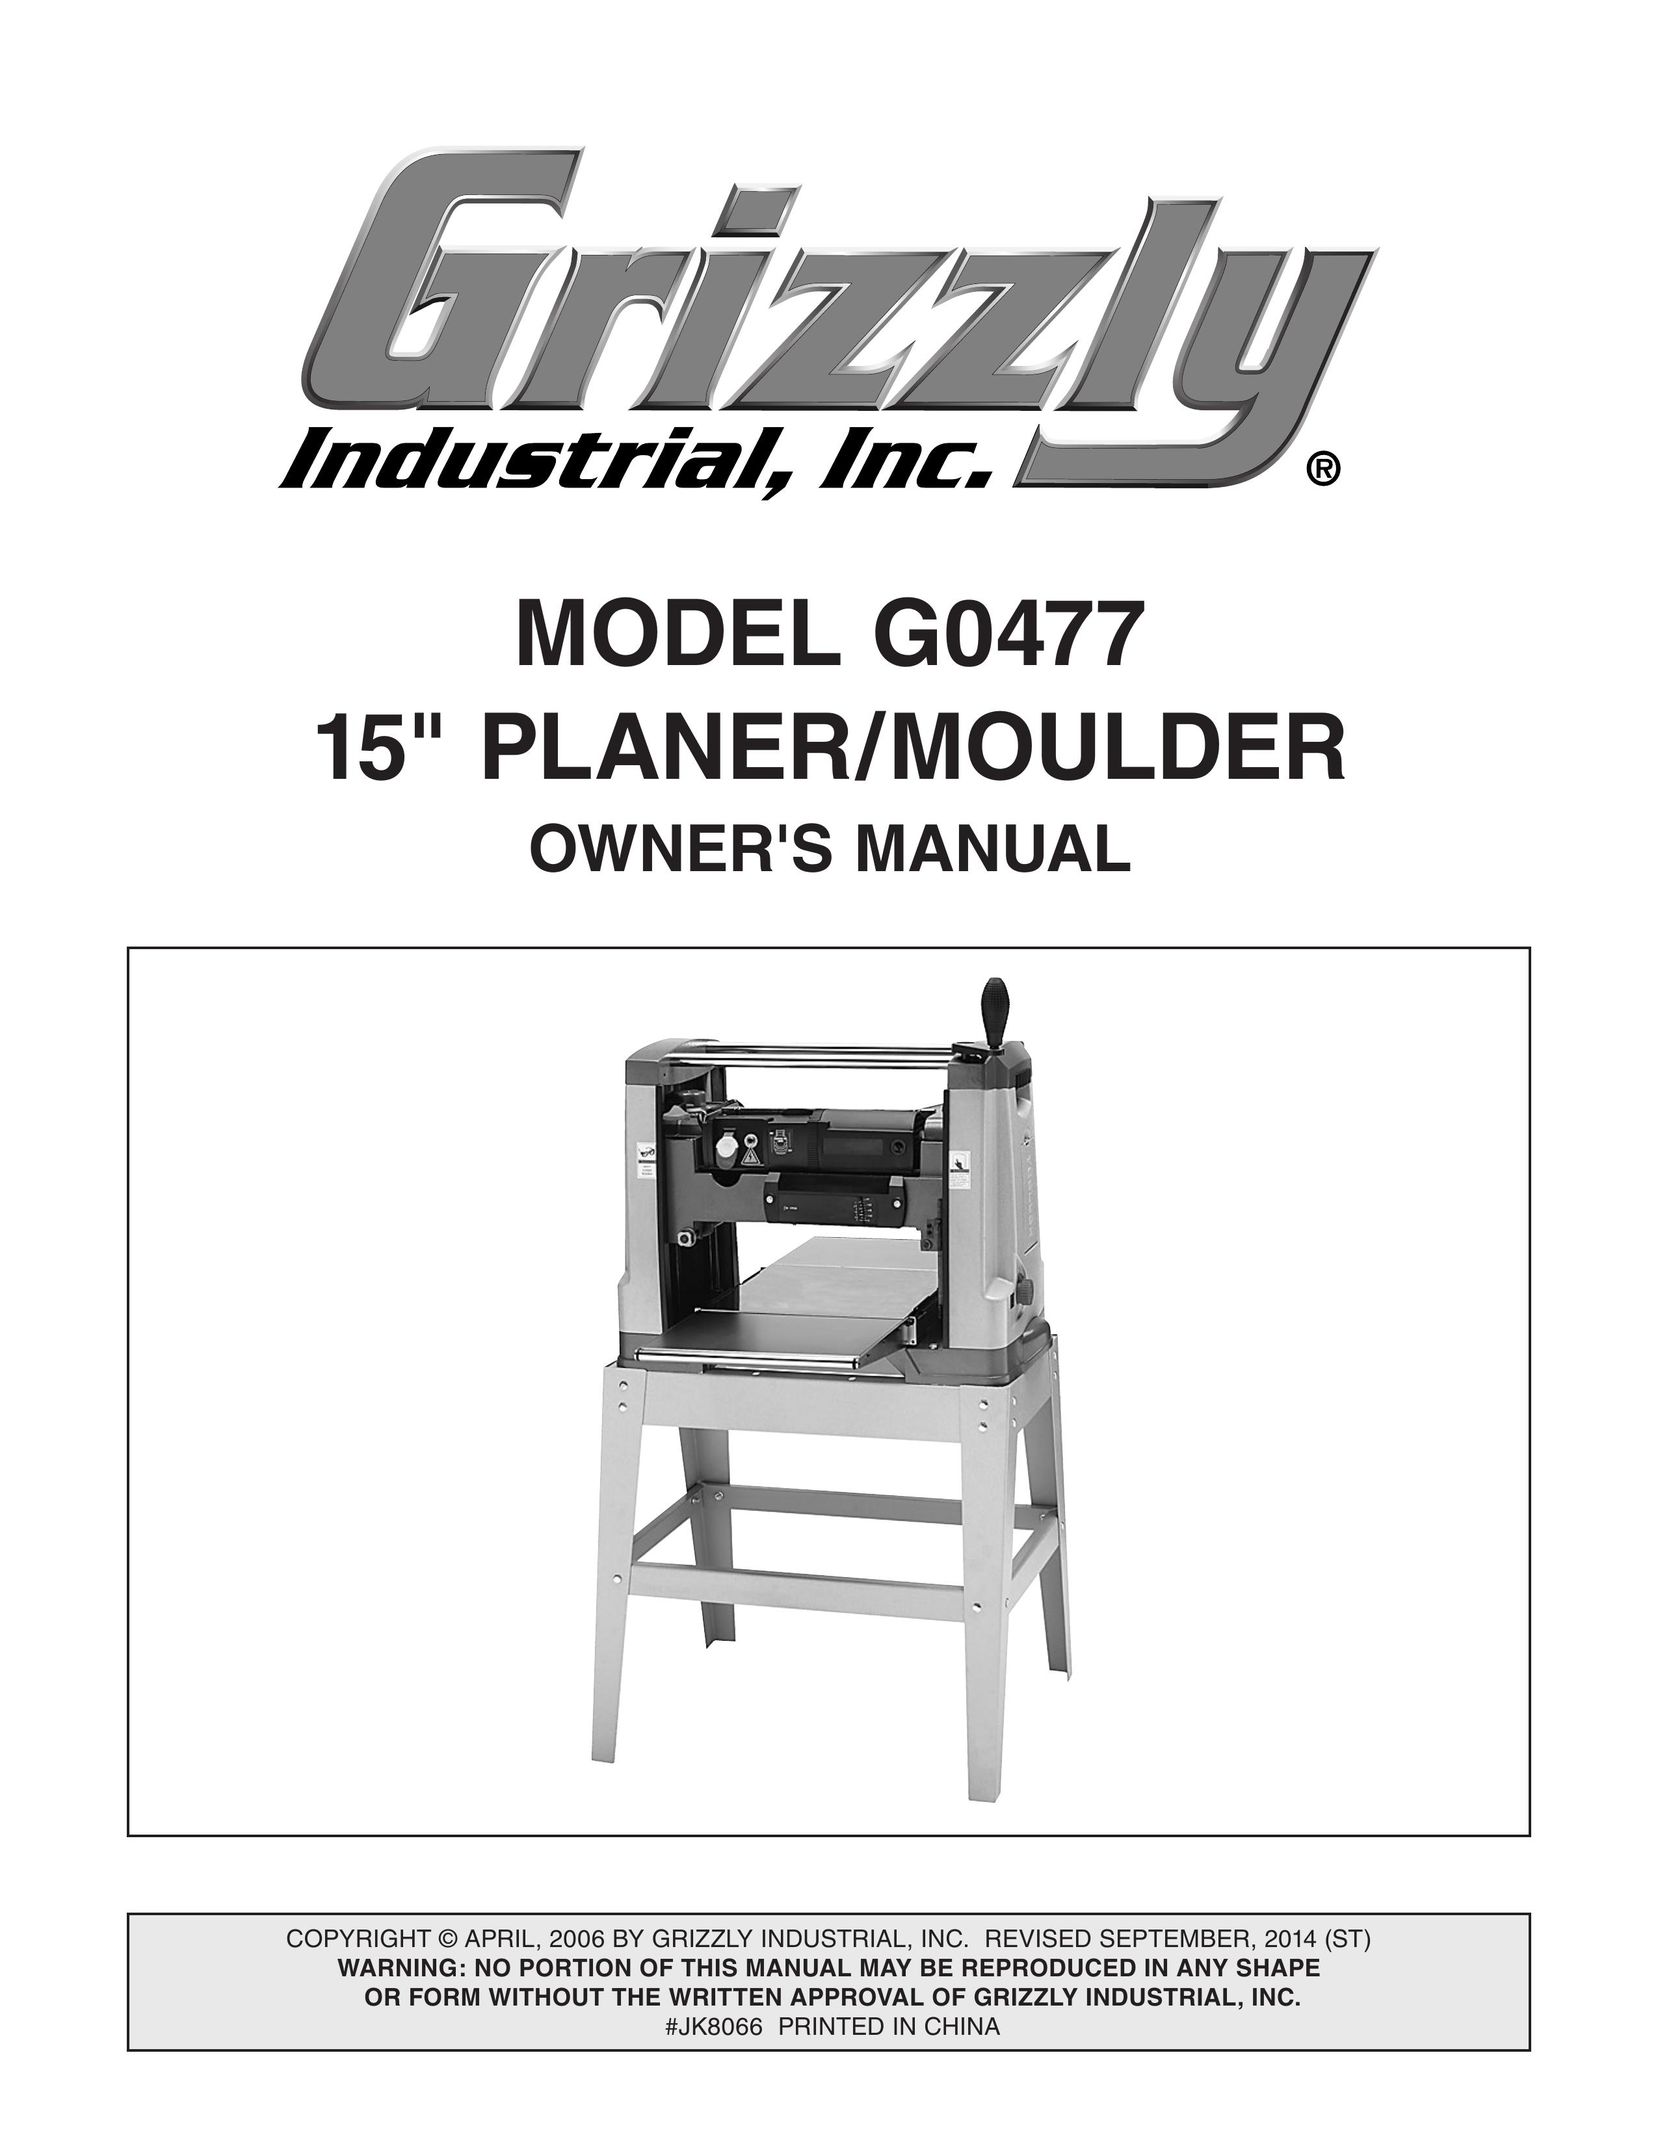 Grizzly G0477 Planer User Manual